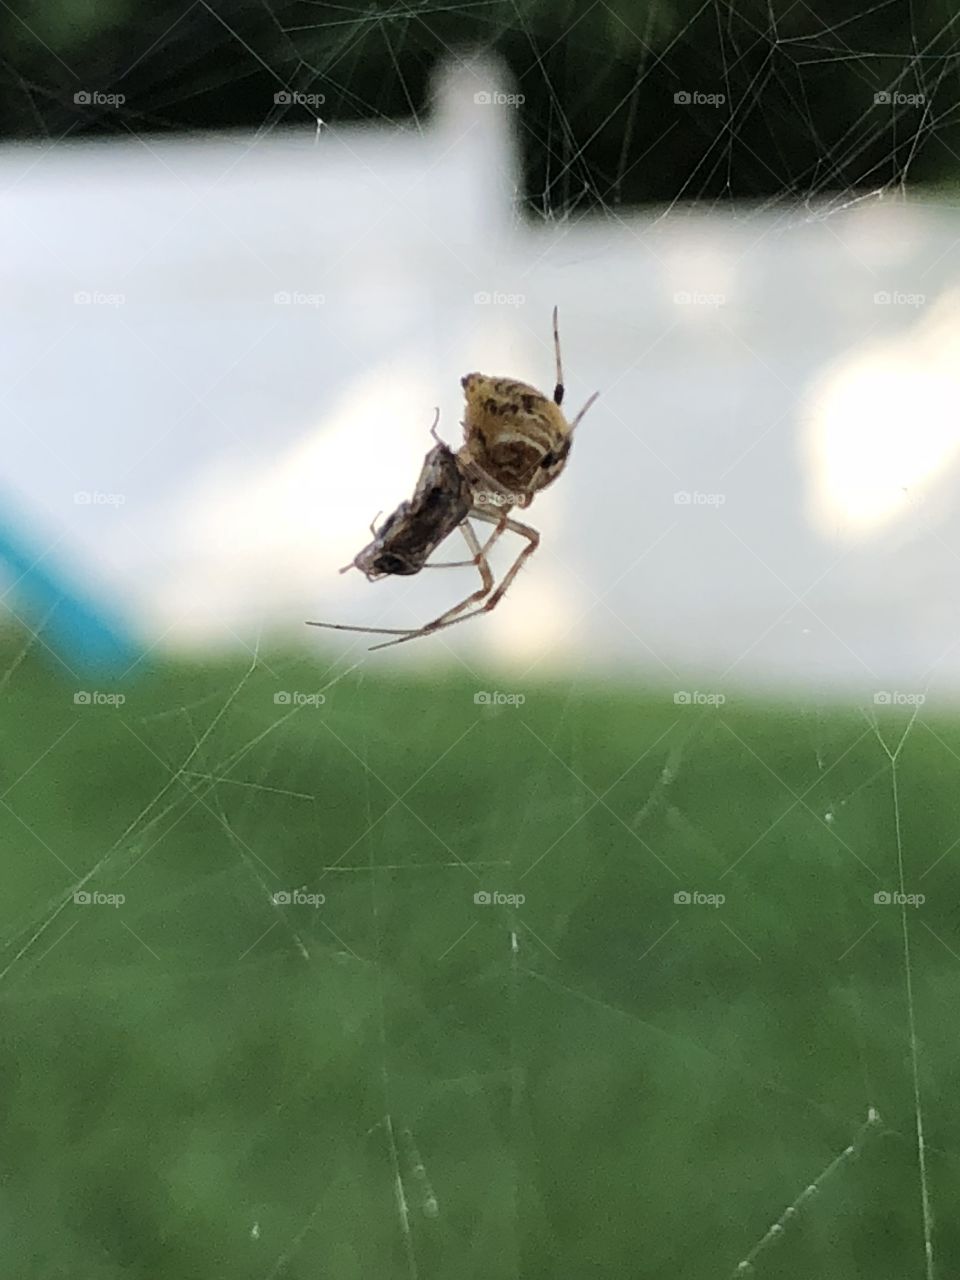 Spider eating fly